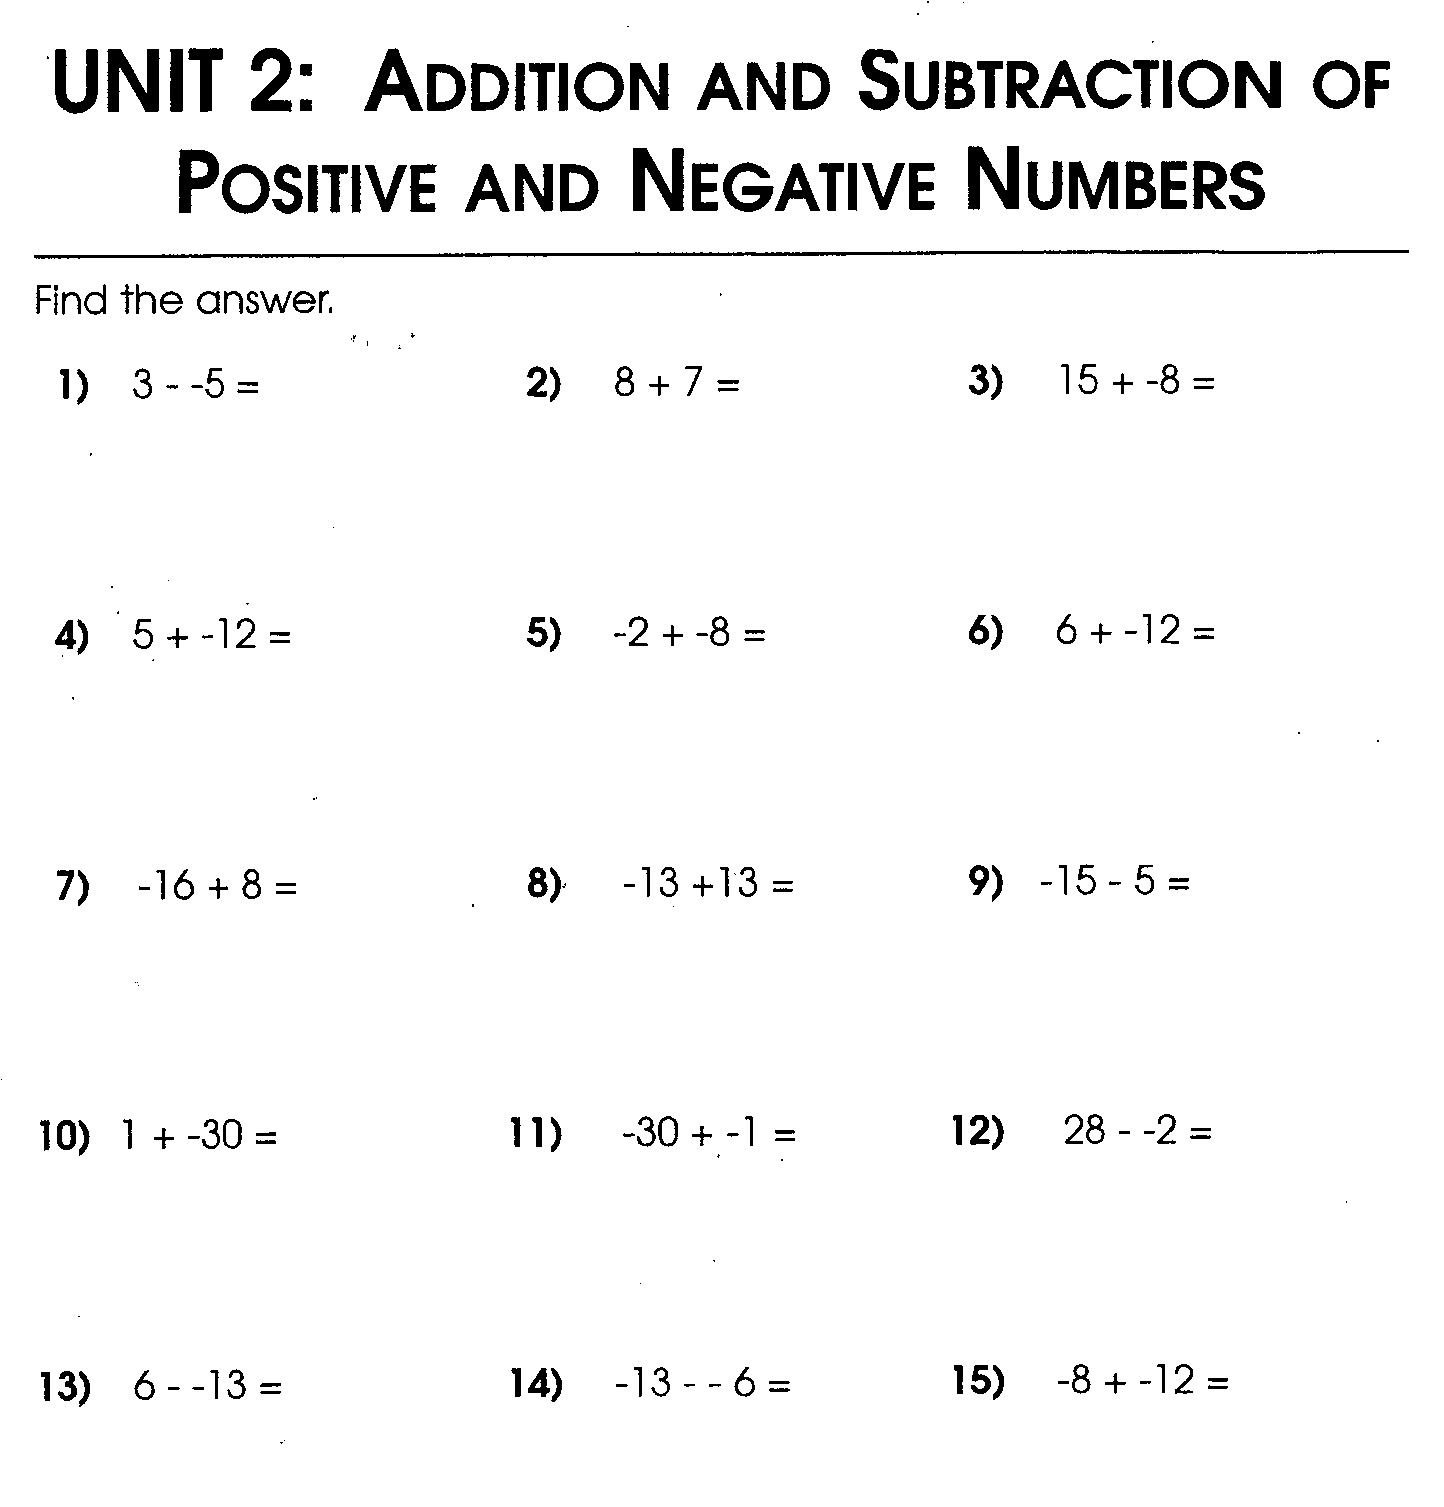 Adding and Subtracting Integers Problems Image